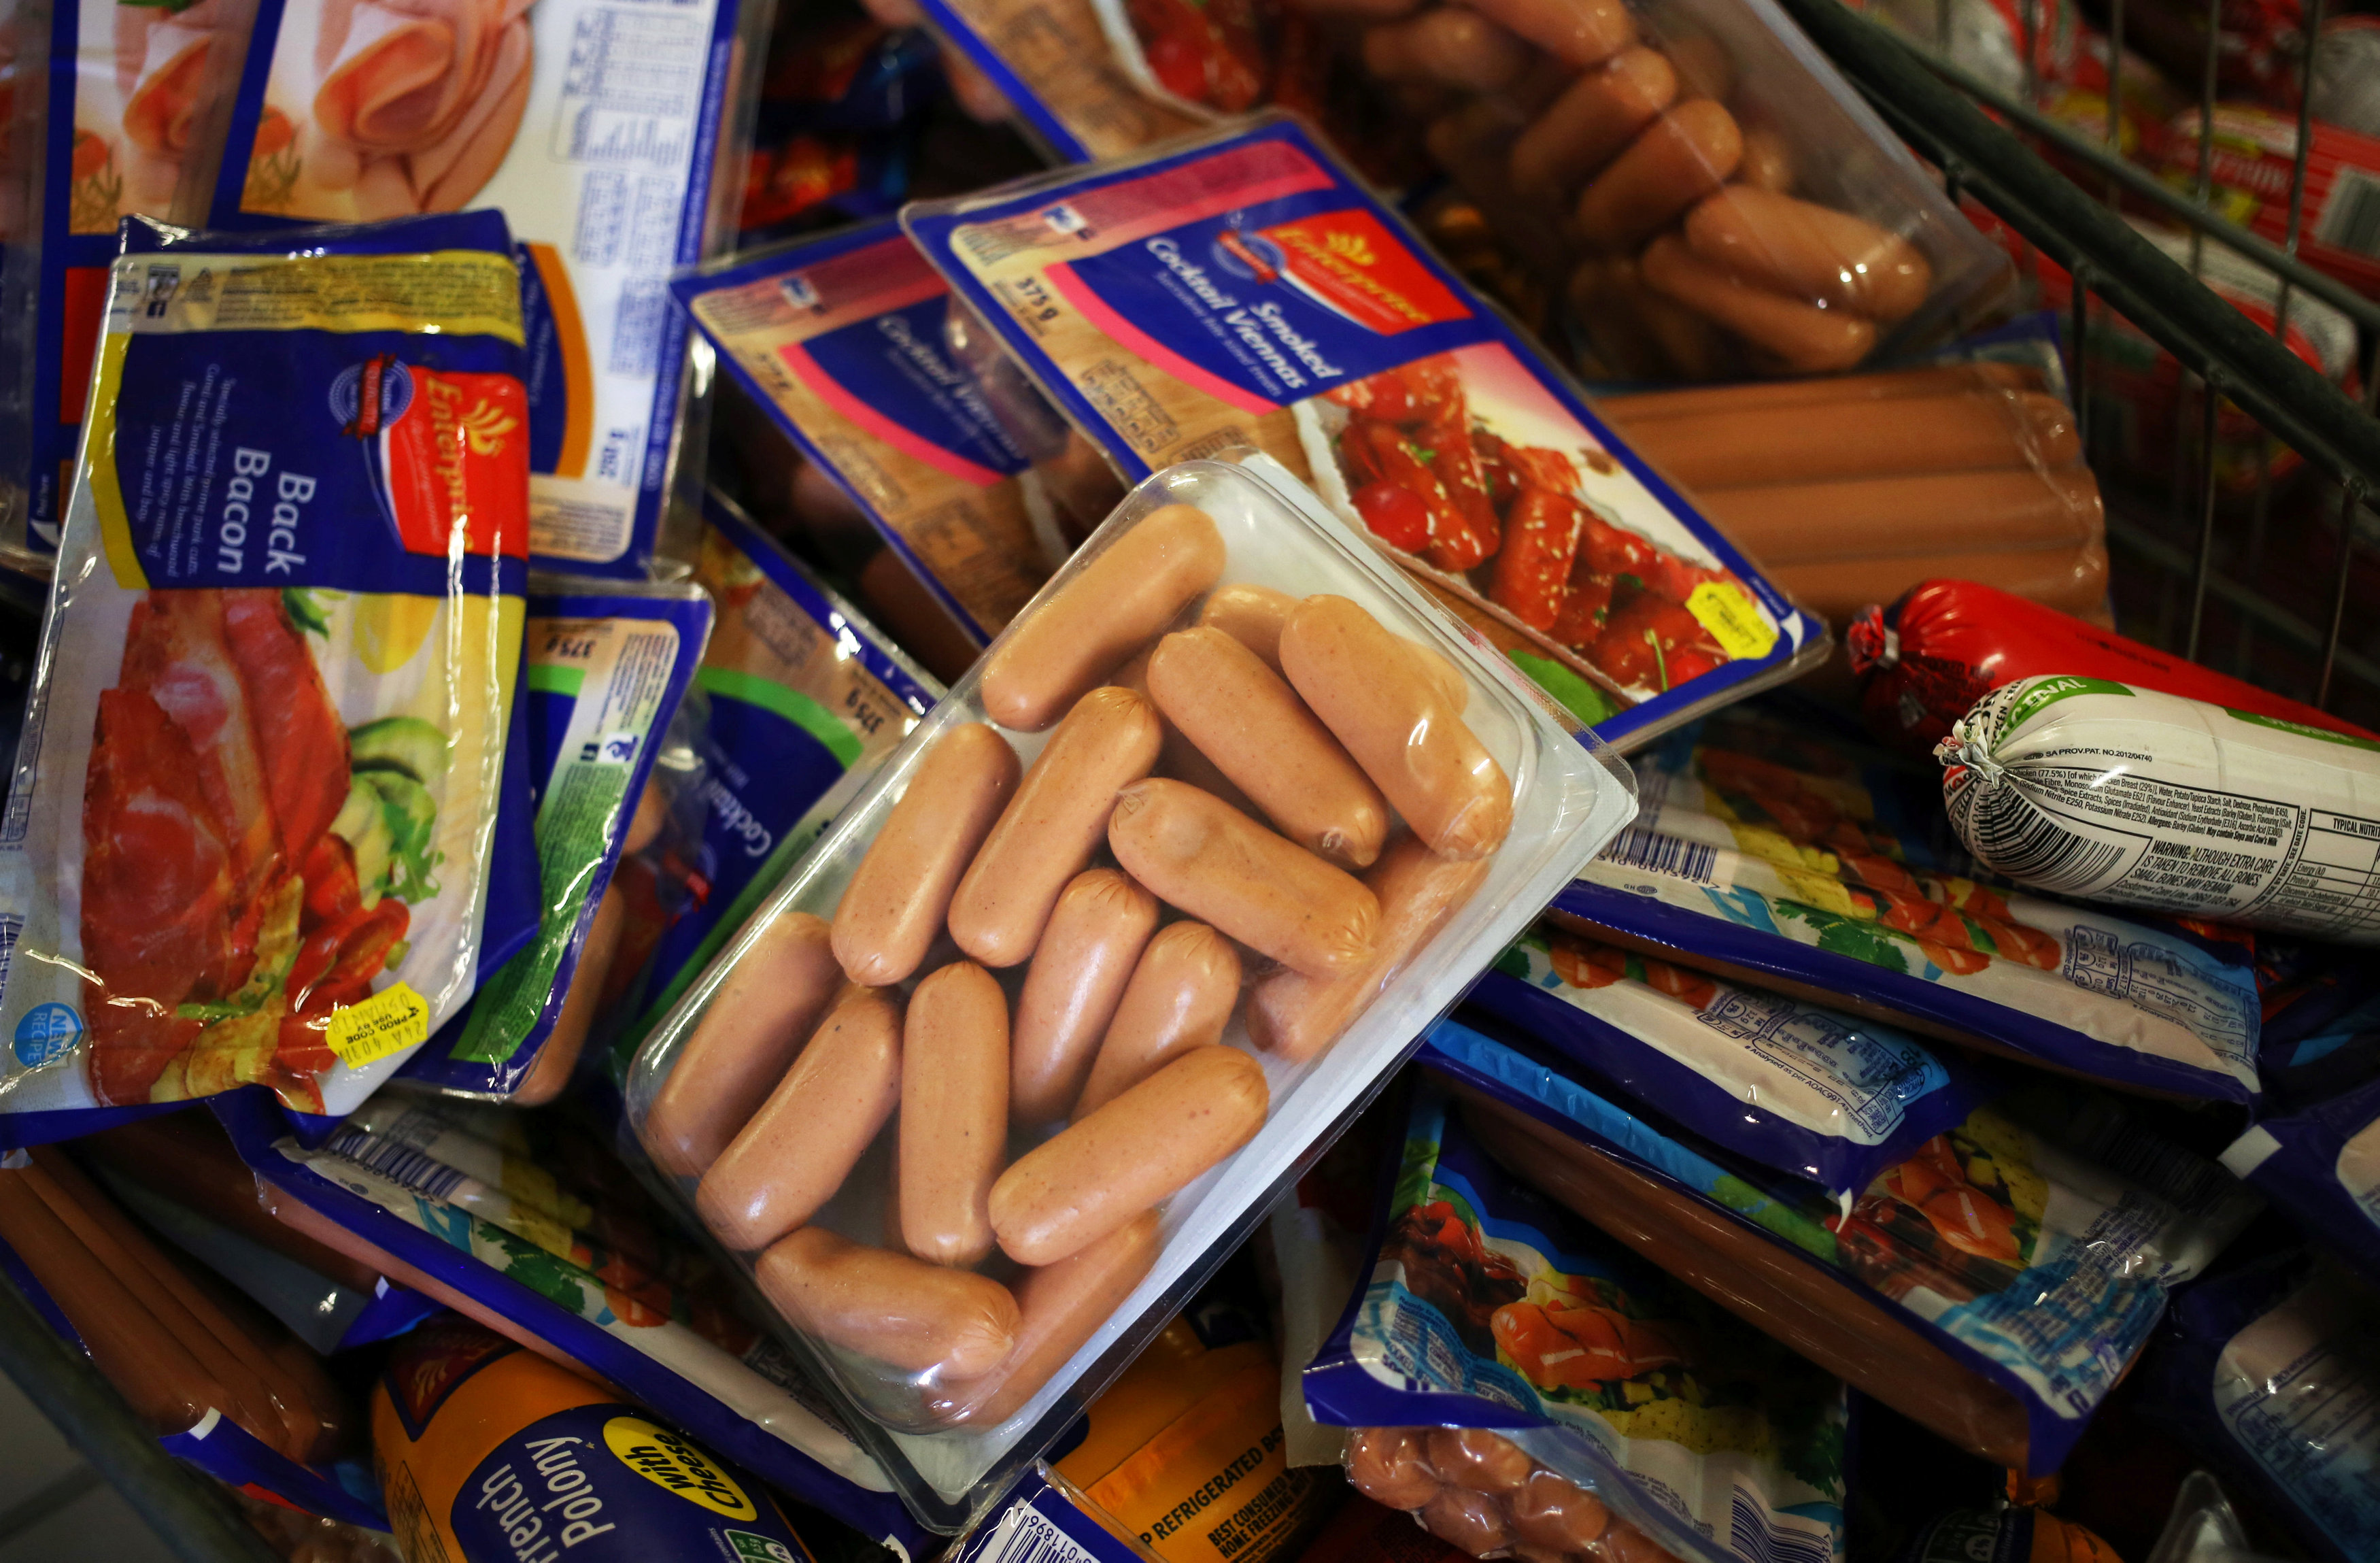 South Africa blames processed meat firms for delays in listeria probe